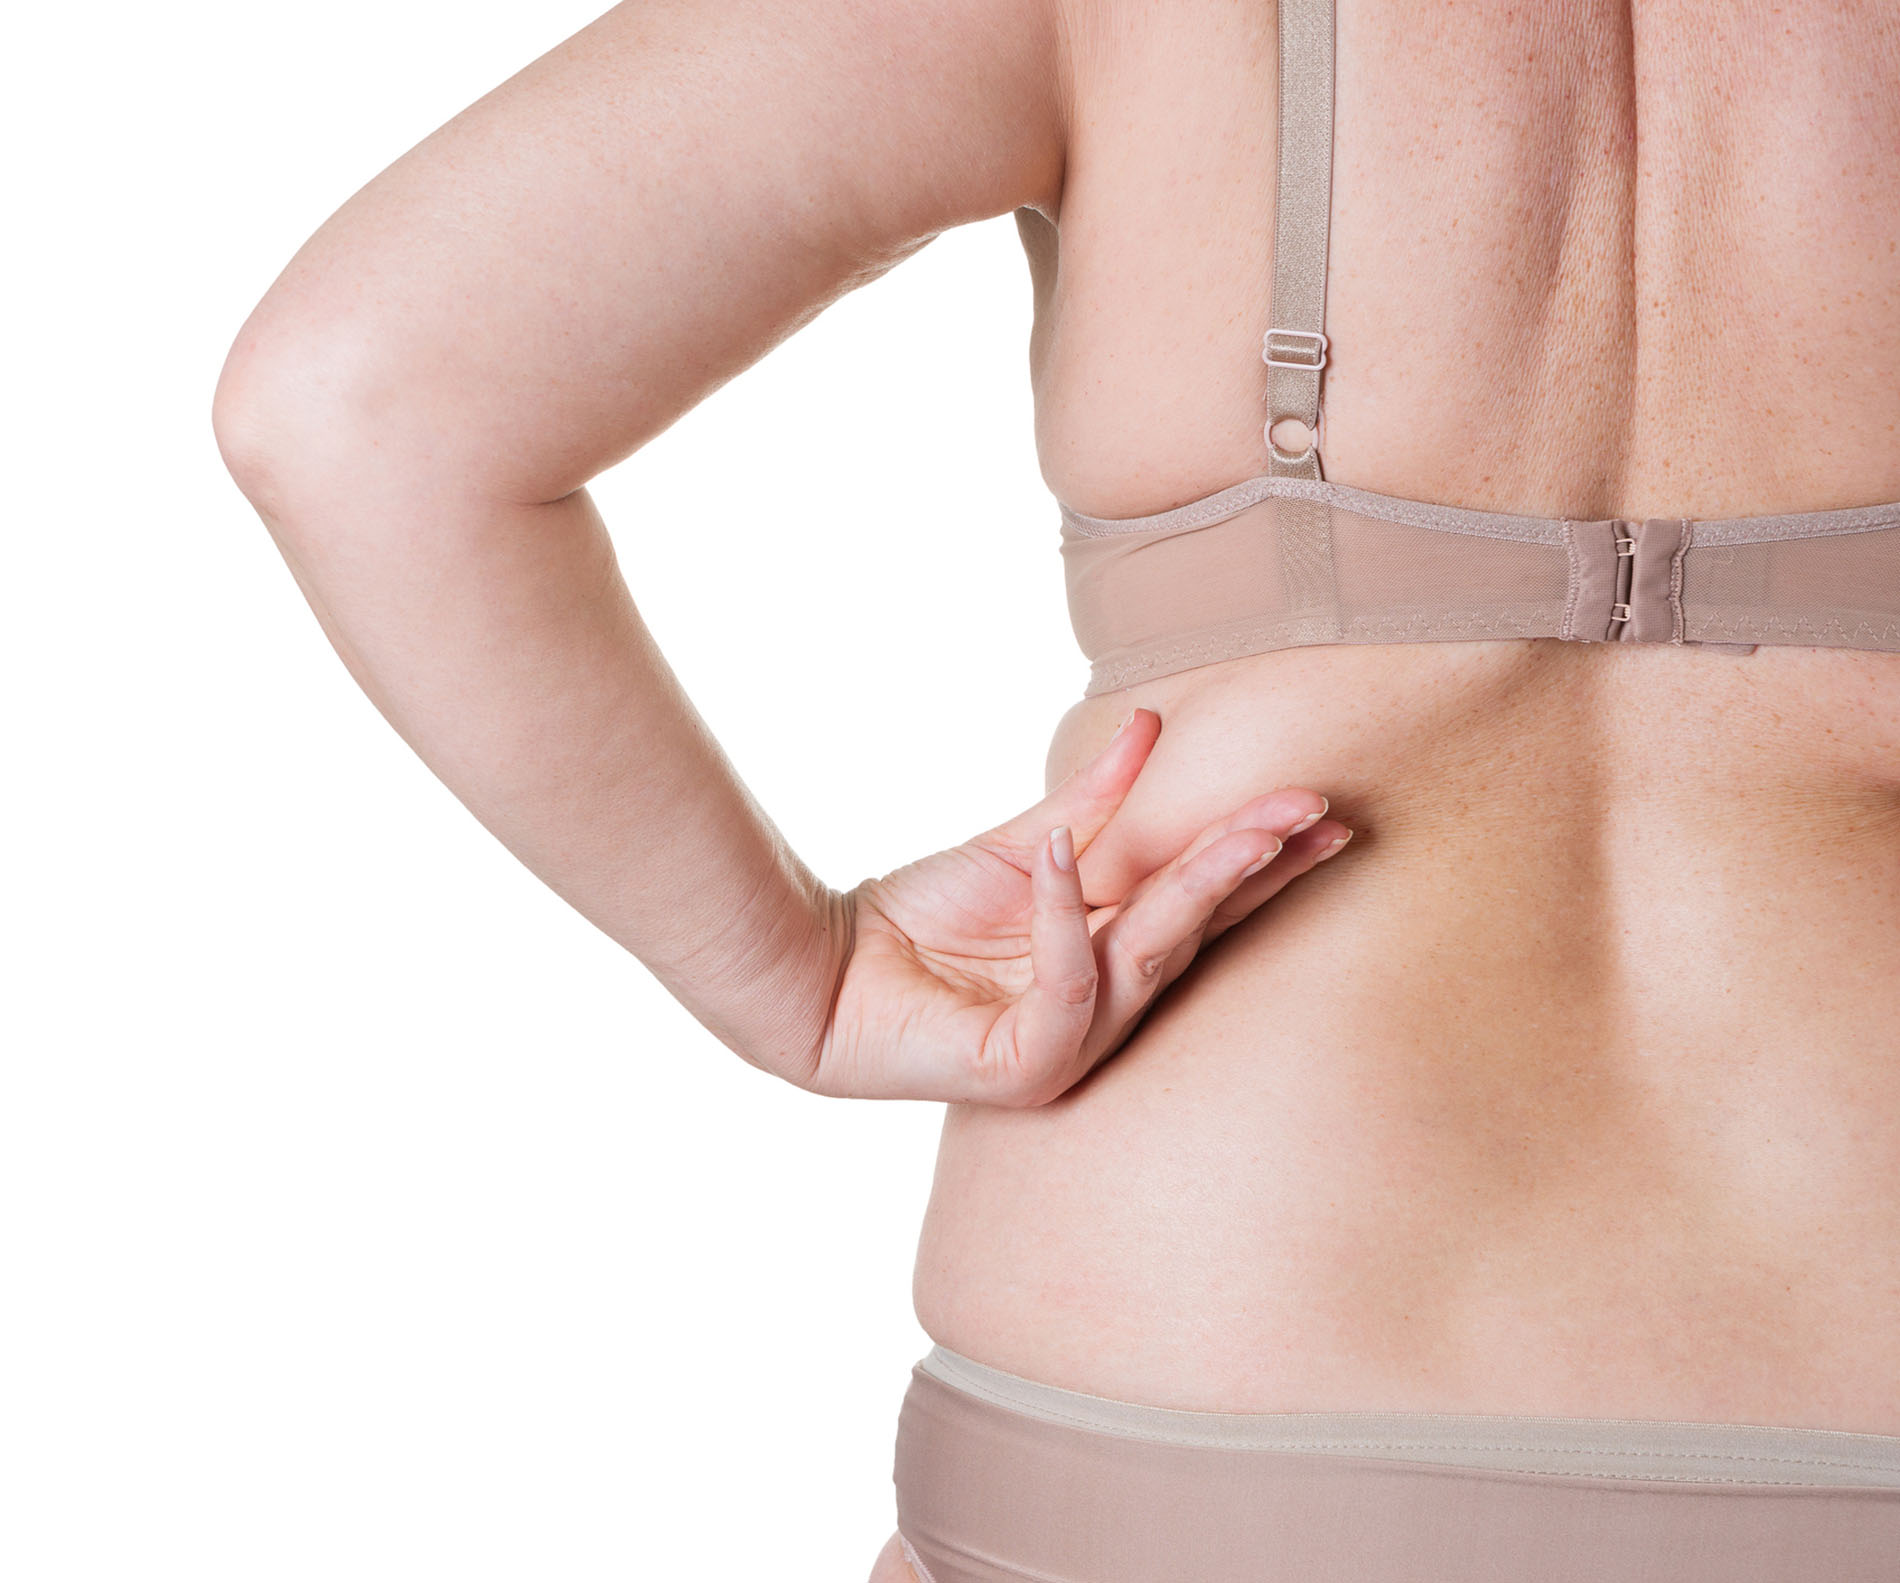 1 Minute To Reduce Upper Back Fat + Bra Bulge Permanently ( Easy + No  Equipment Needed ) 